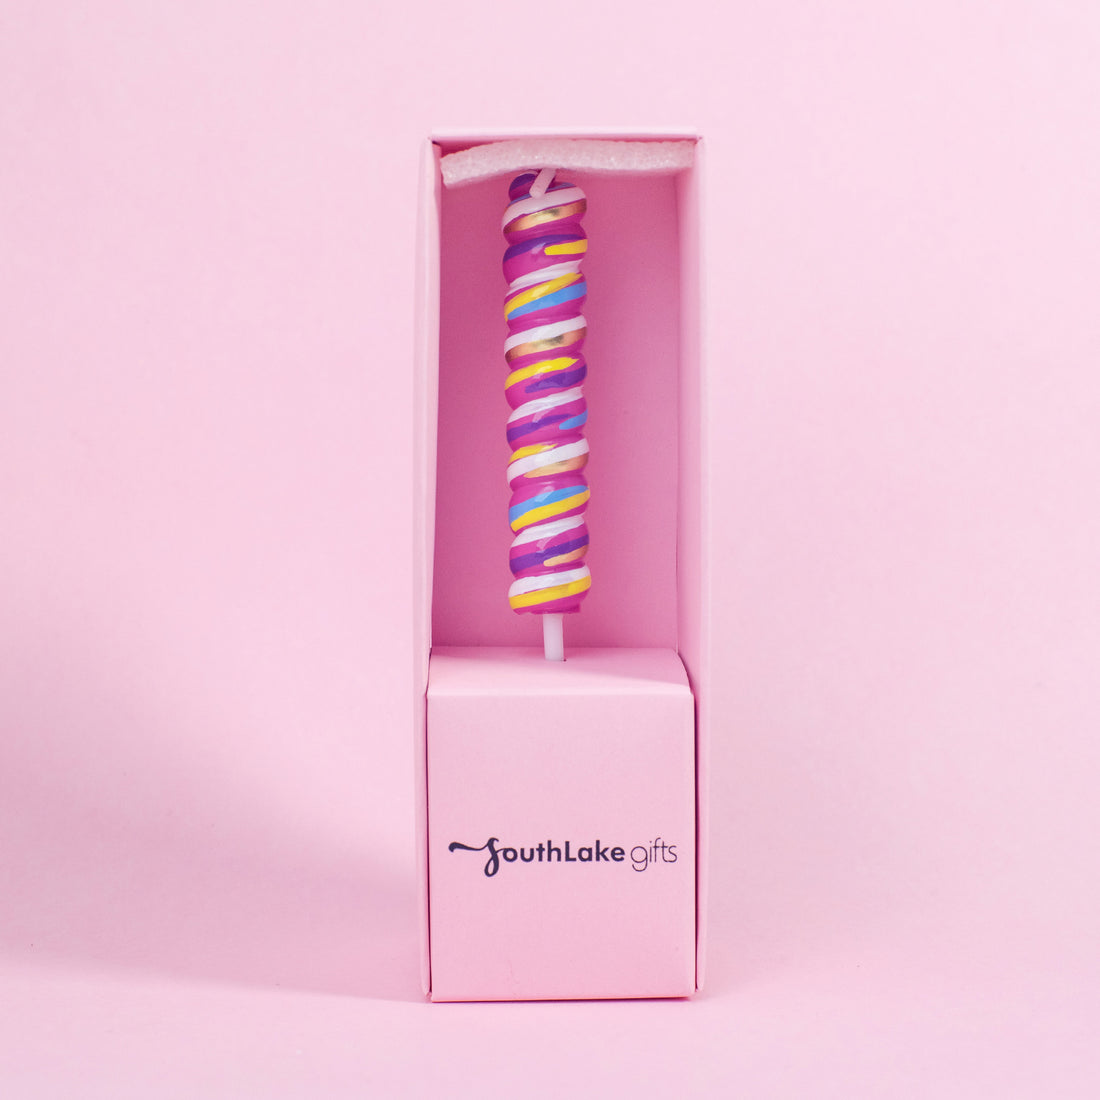 Southlake Gifts Pink Lollipop Candy Cake Topper Candle Box.